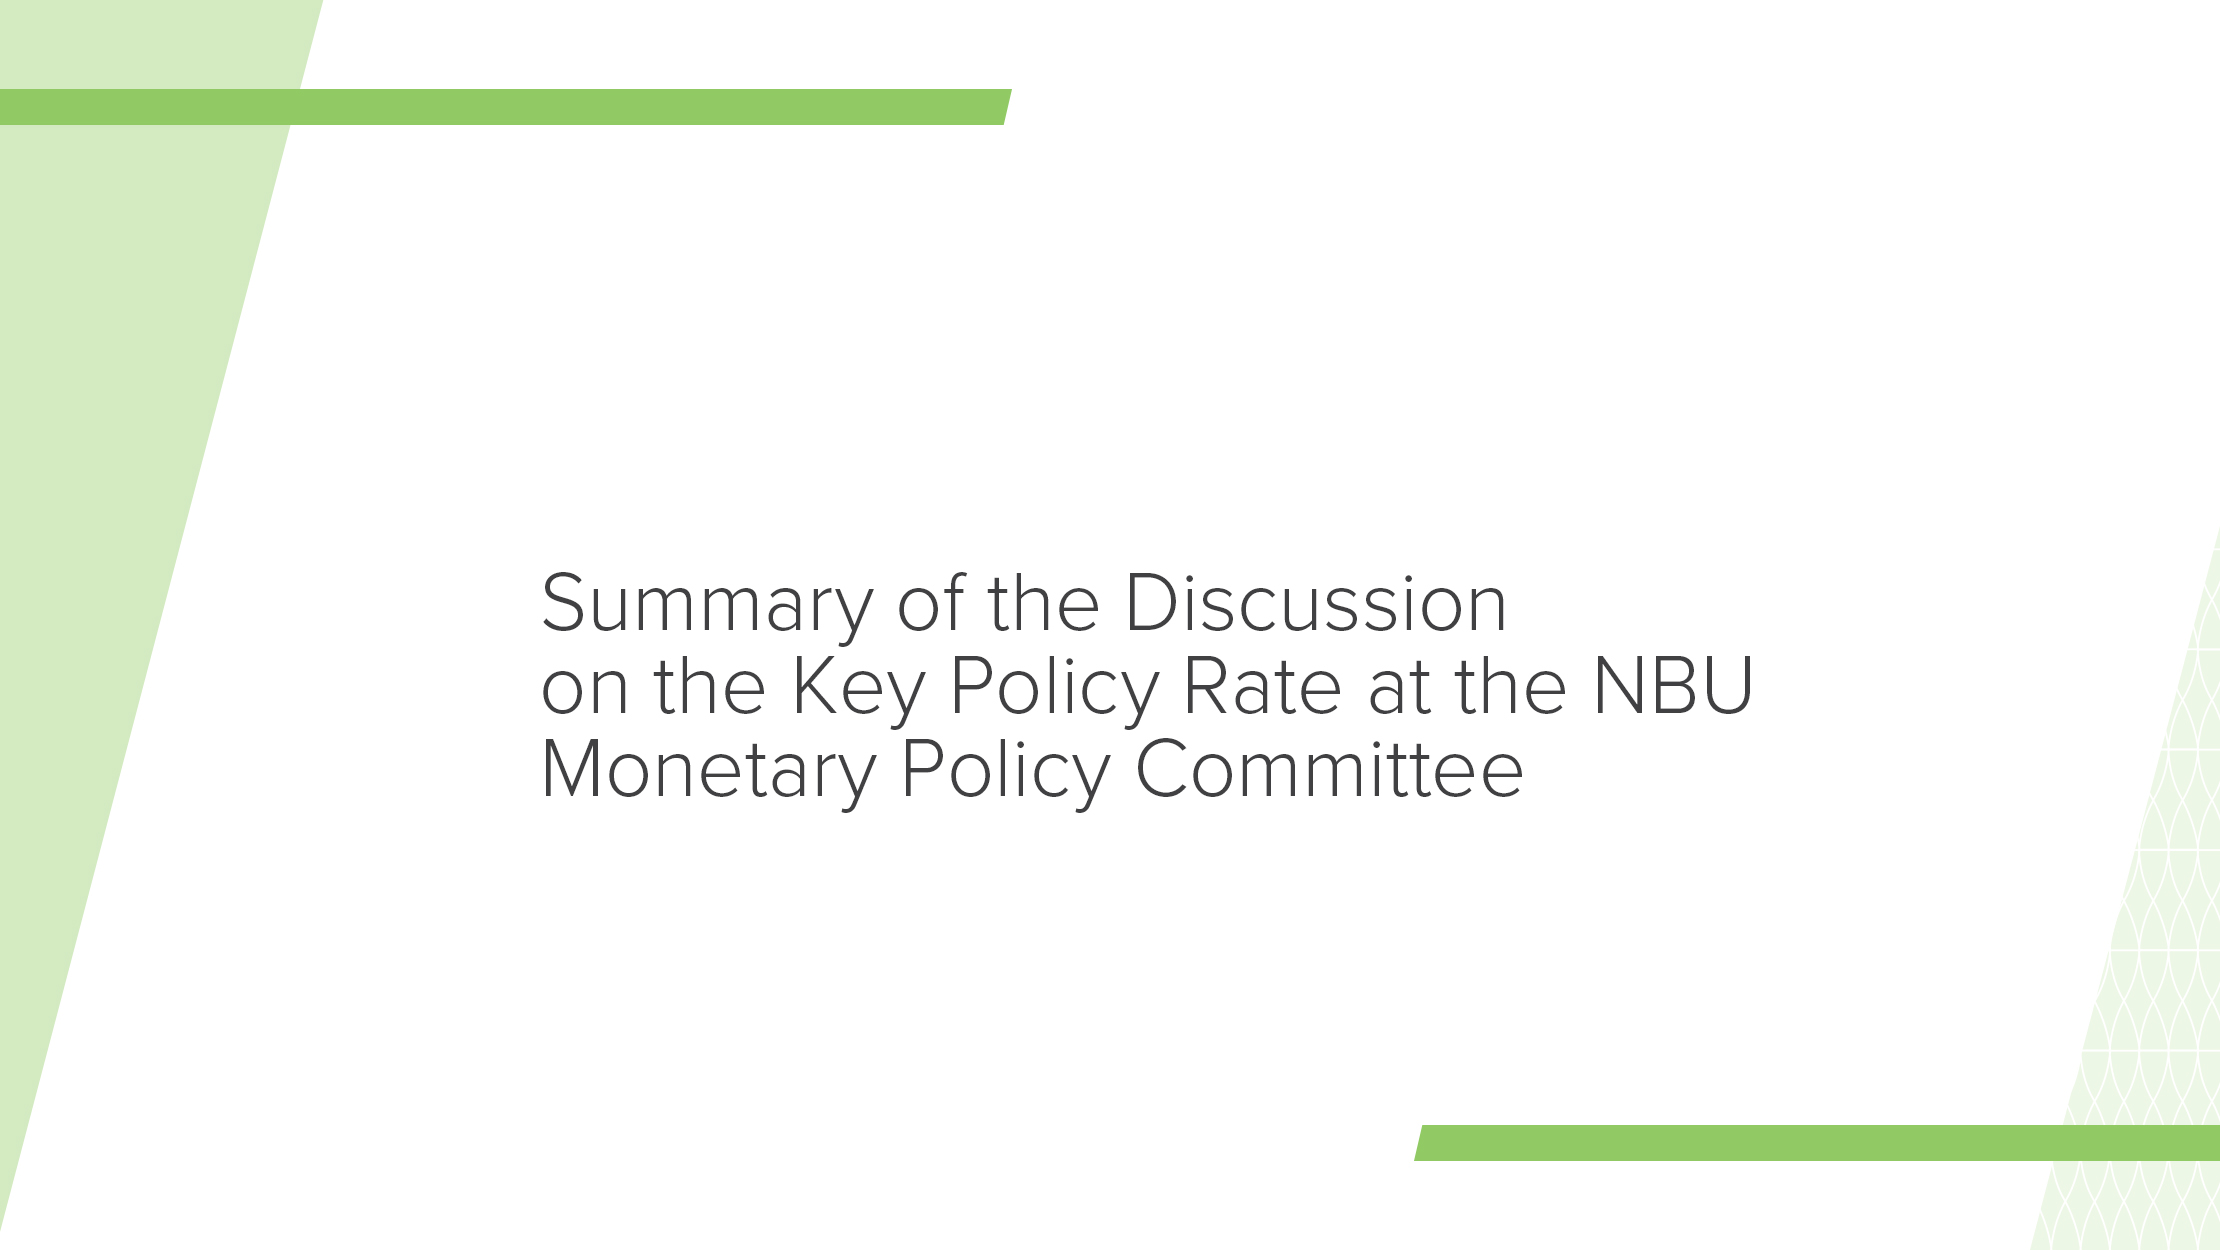 Summary of Key Policy Rate Discussion by NBU Monetary Policy Committee on 26 July 2023